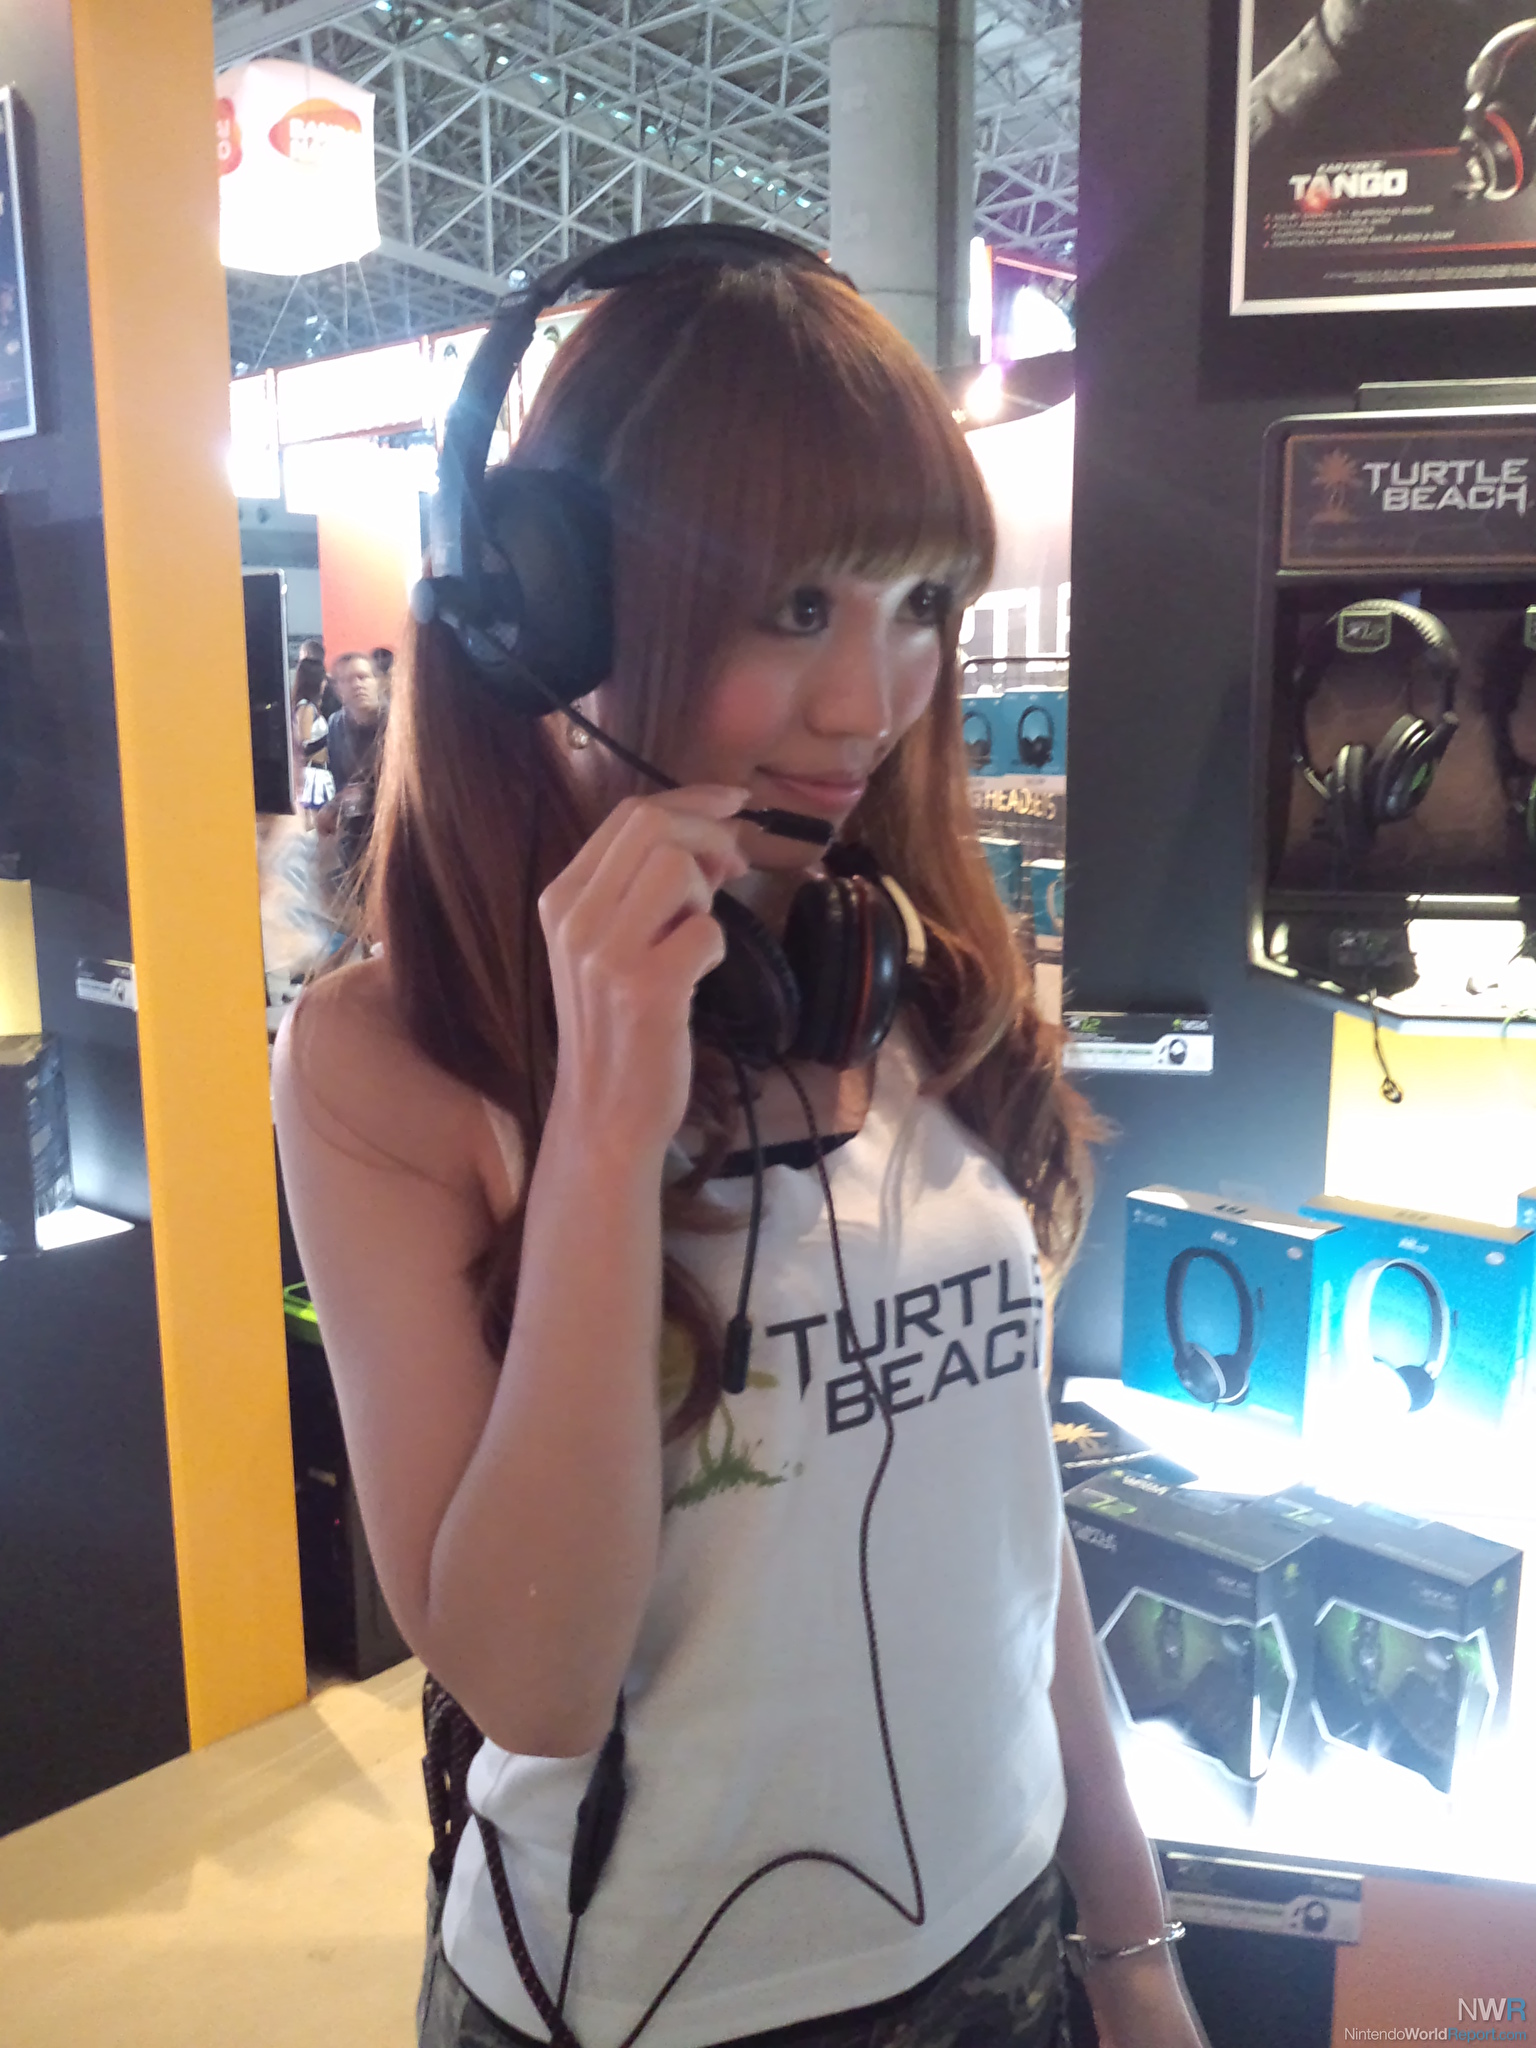 Turtle Beach Wii U Official Headsets Announced - News - Nintendo World  Report